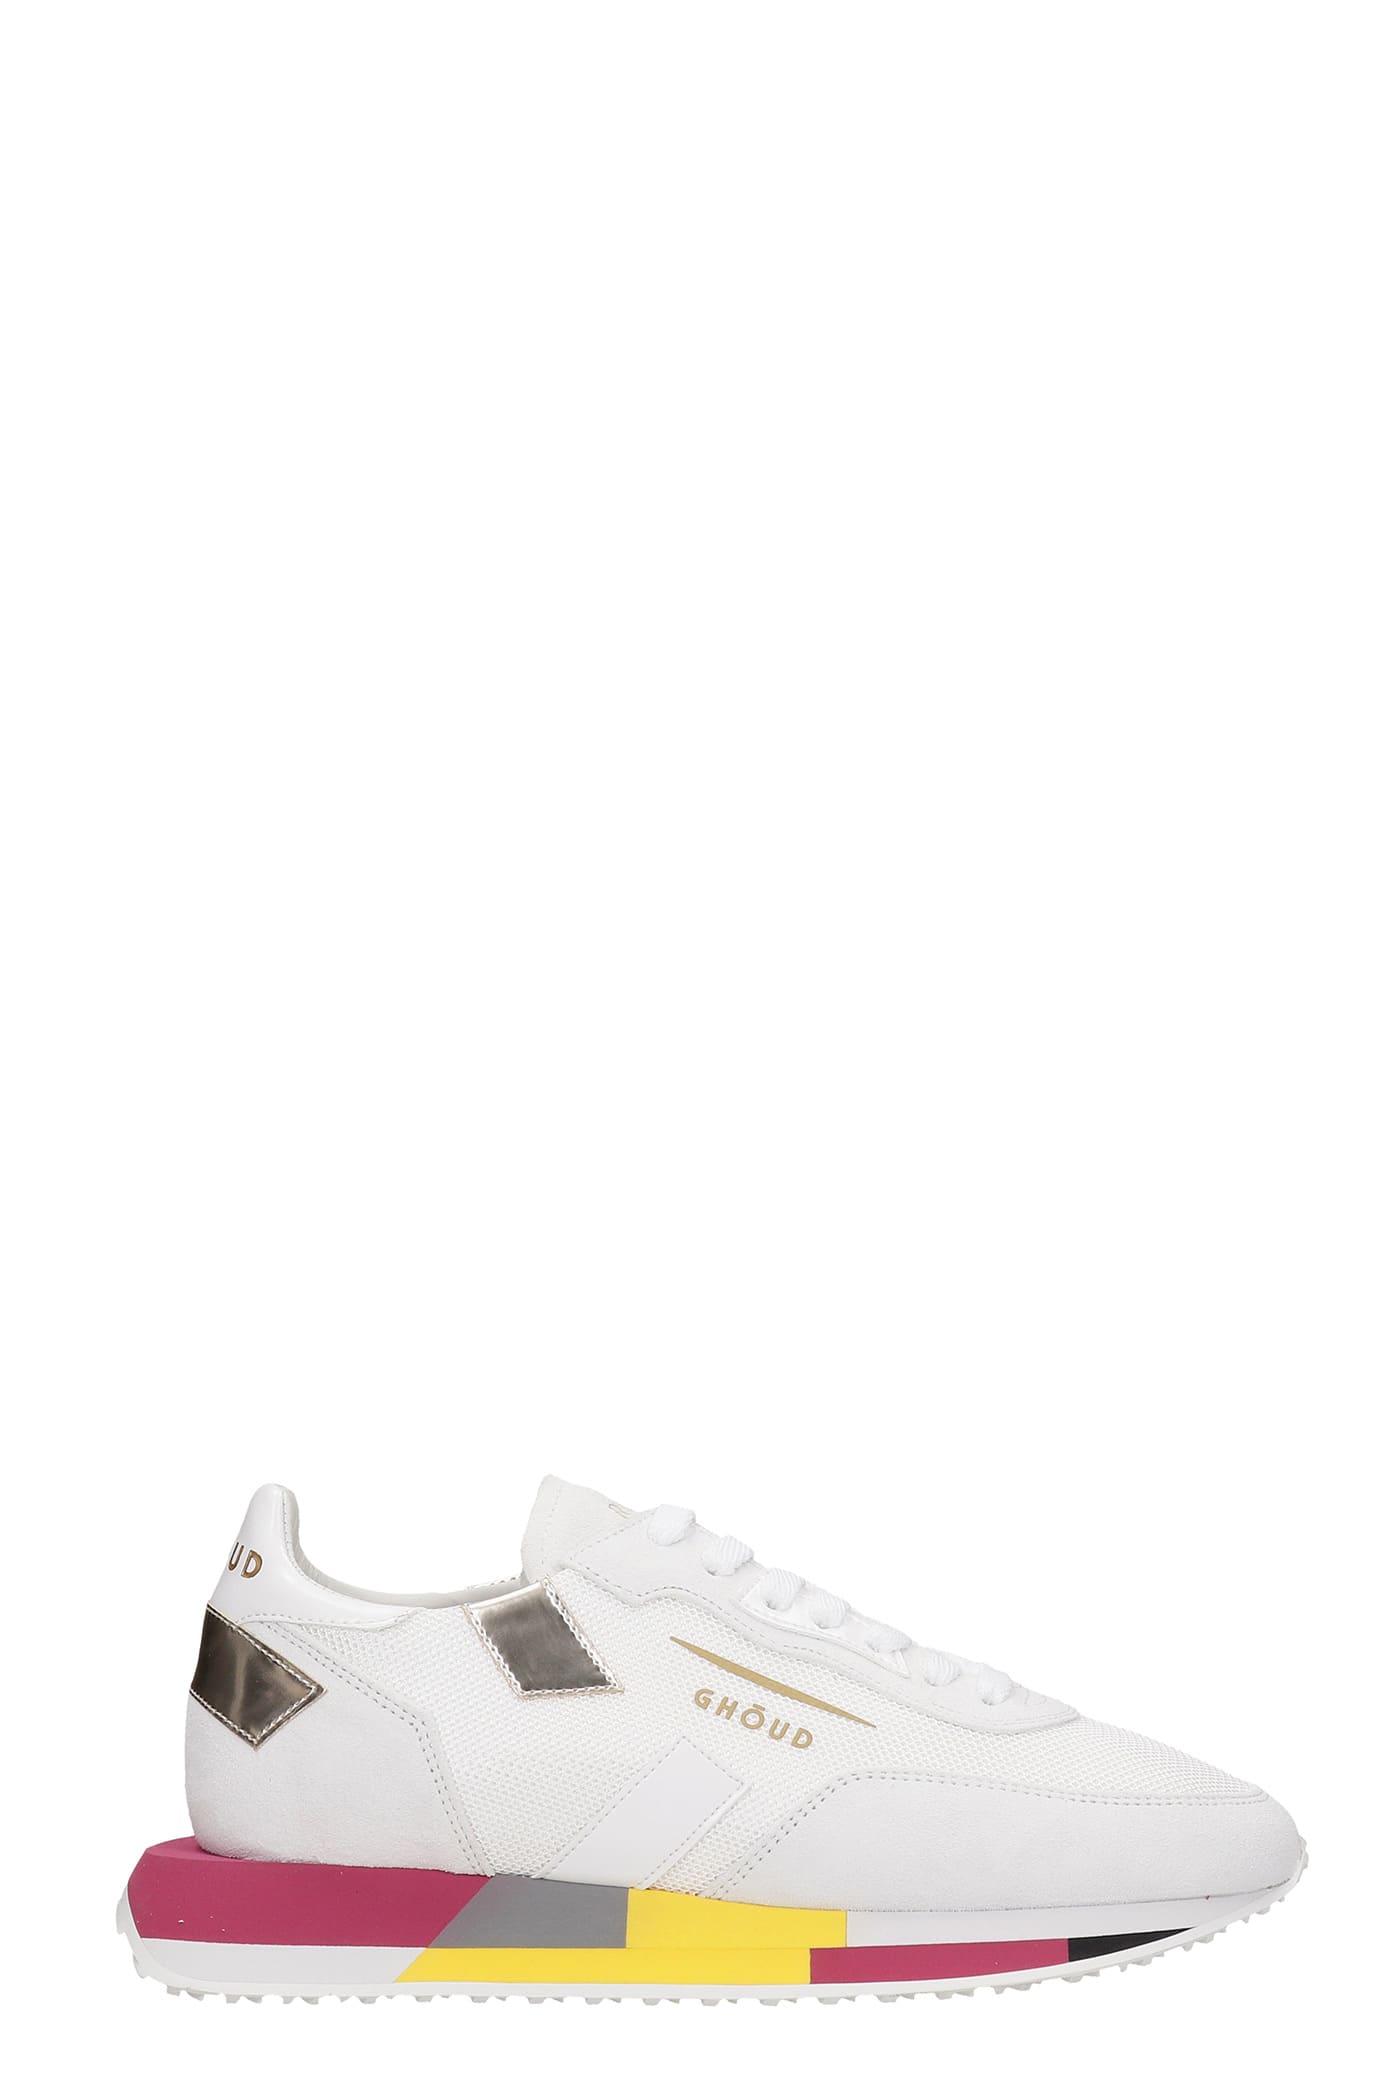 GHOUD Rush Sneakers In White Suede And Fabric